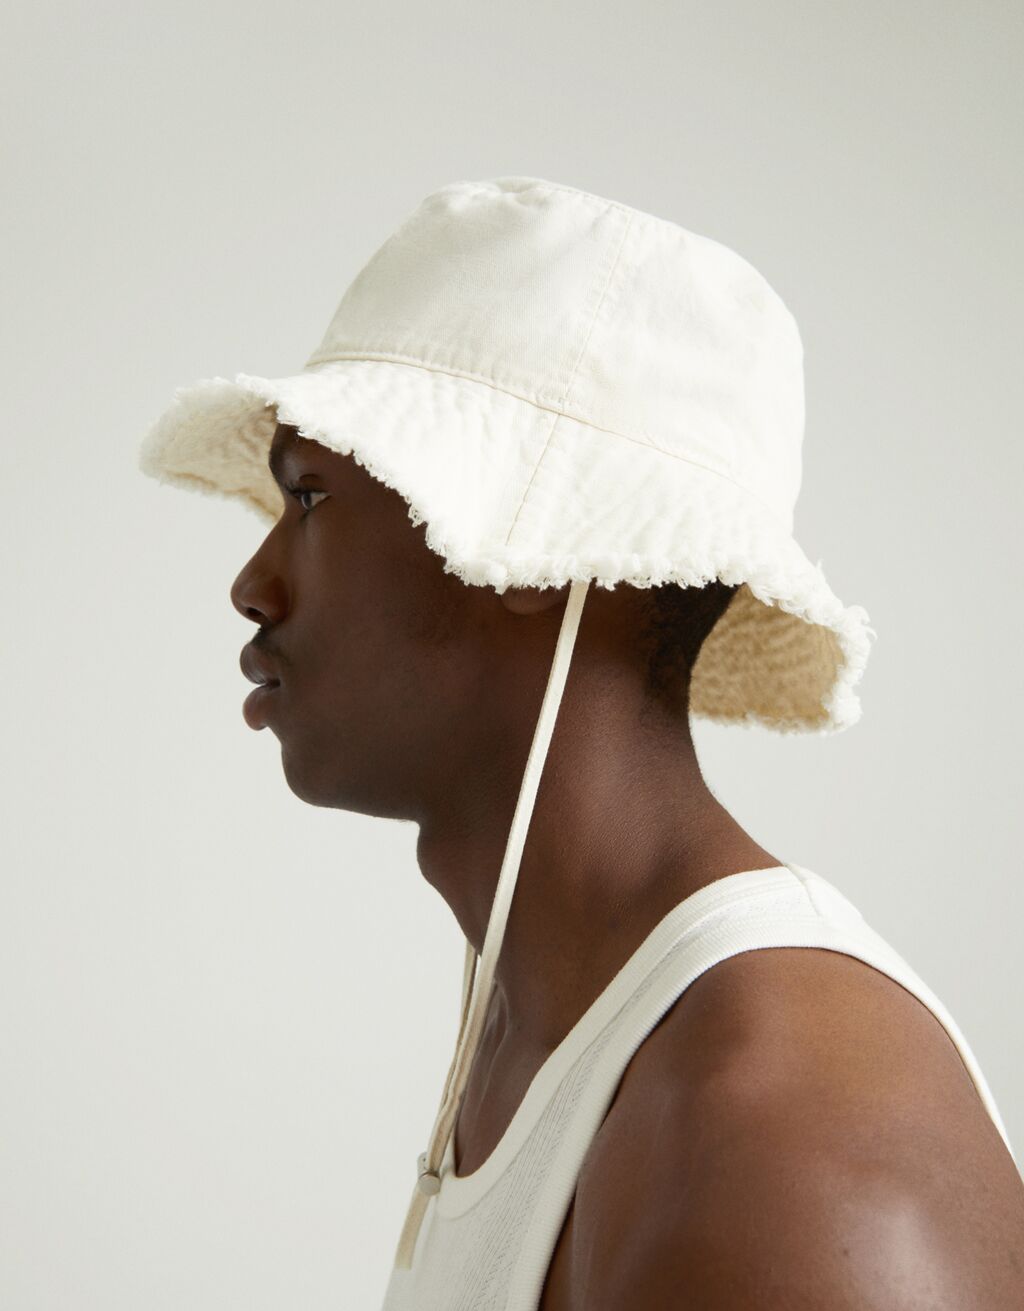 Washed effect cotton bucket hat